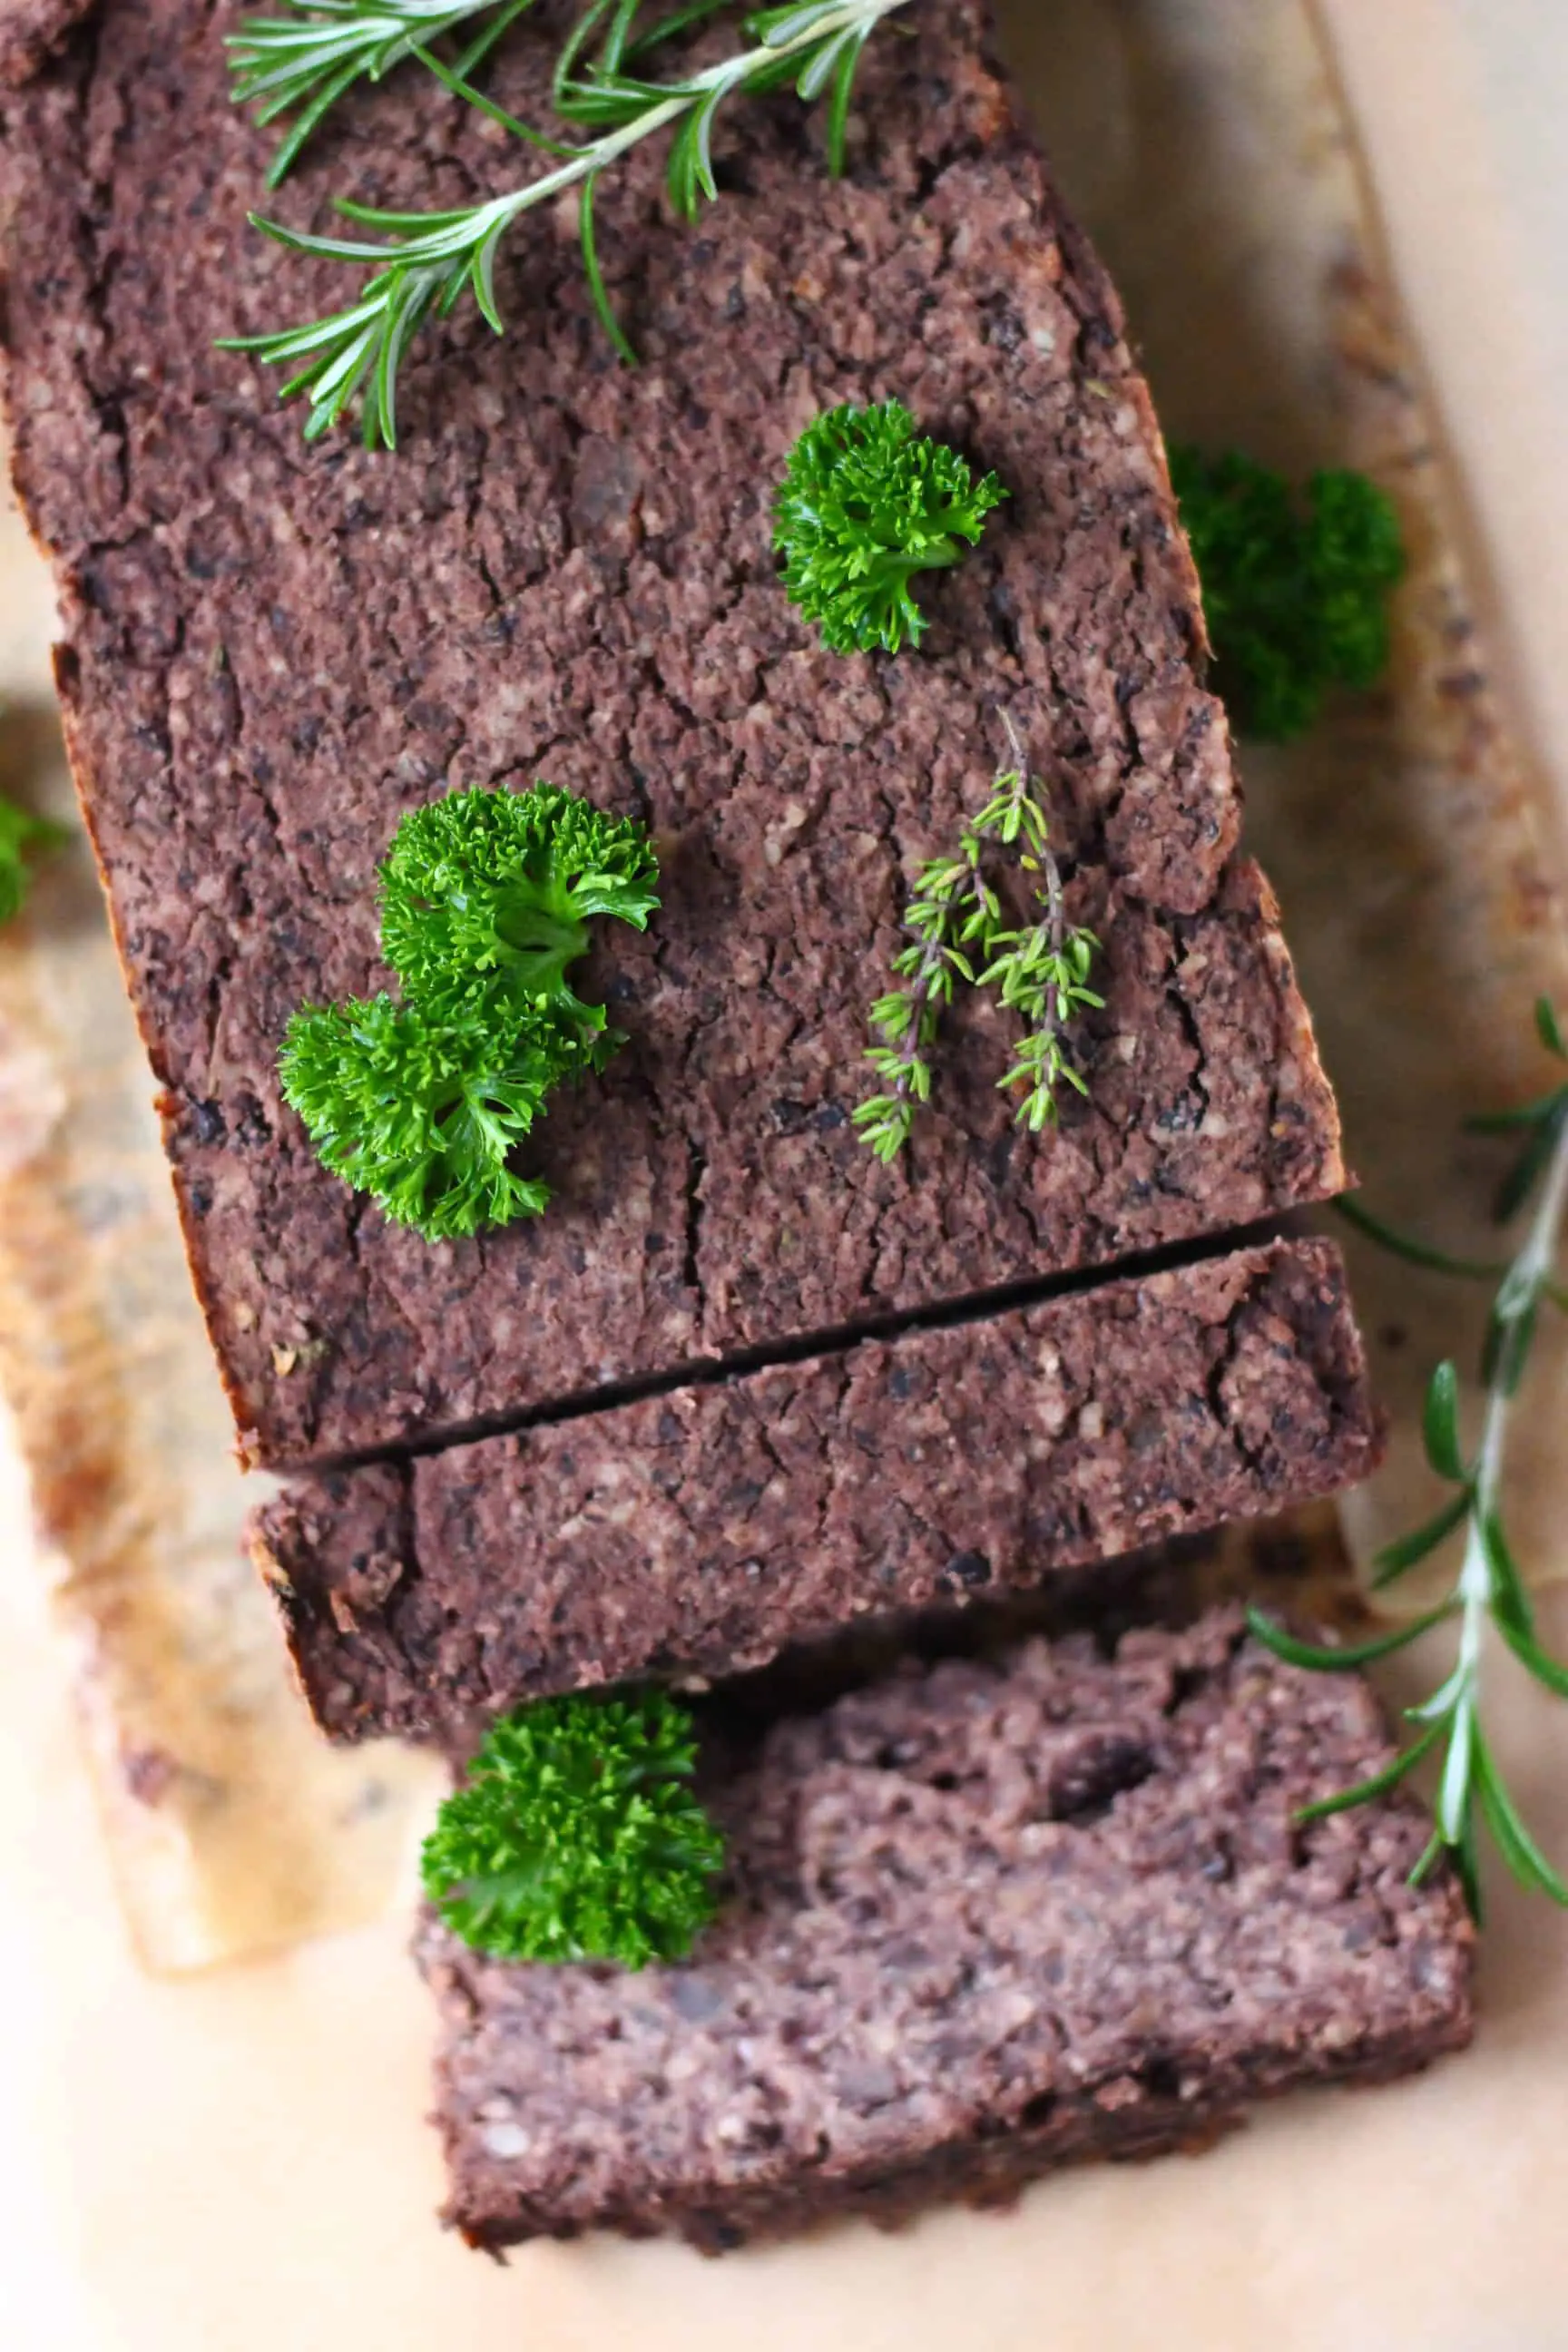 A black vegan meatloaf with two slices taken from it on a sheet of brown baking paper scattered with fresh green herbs